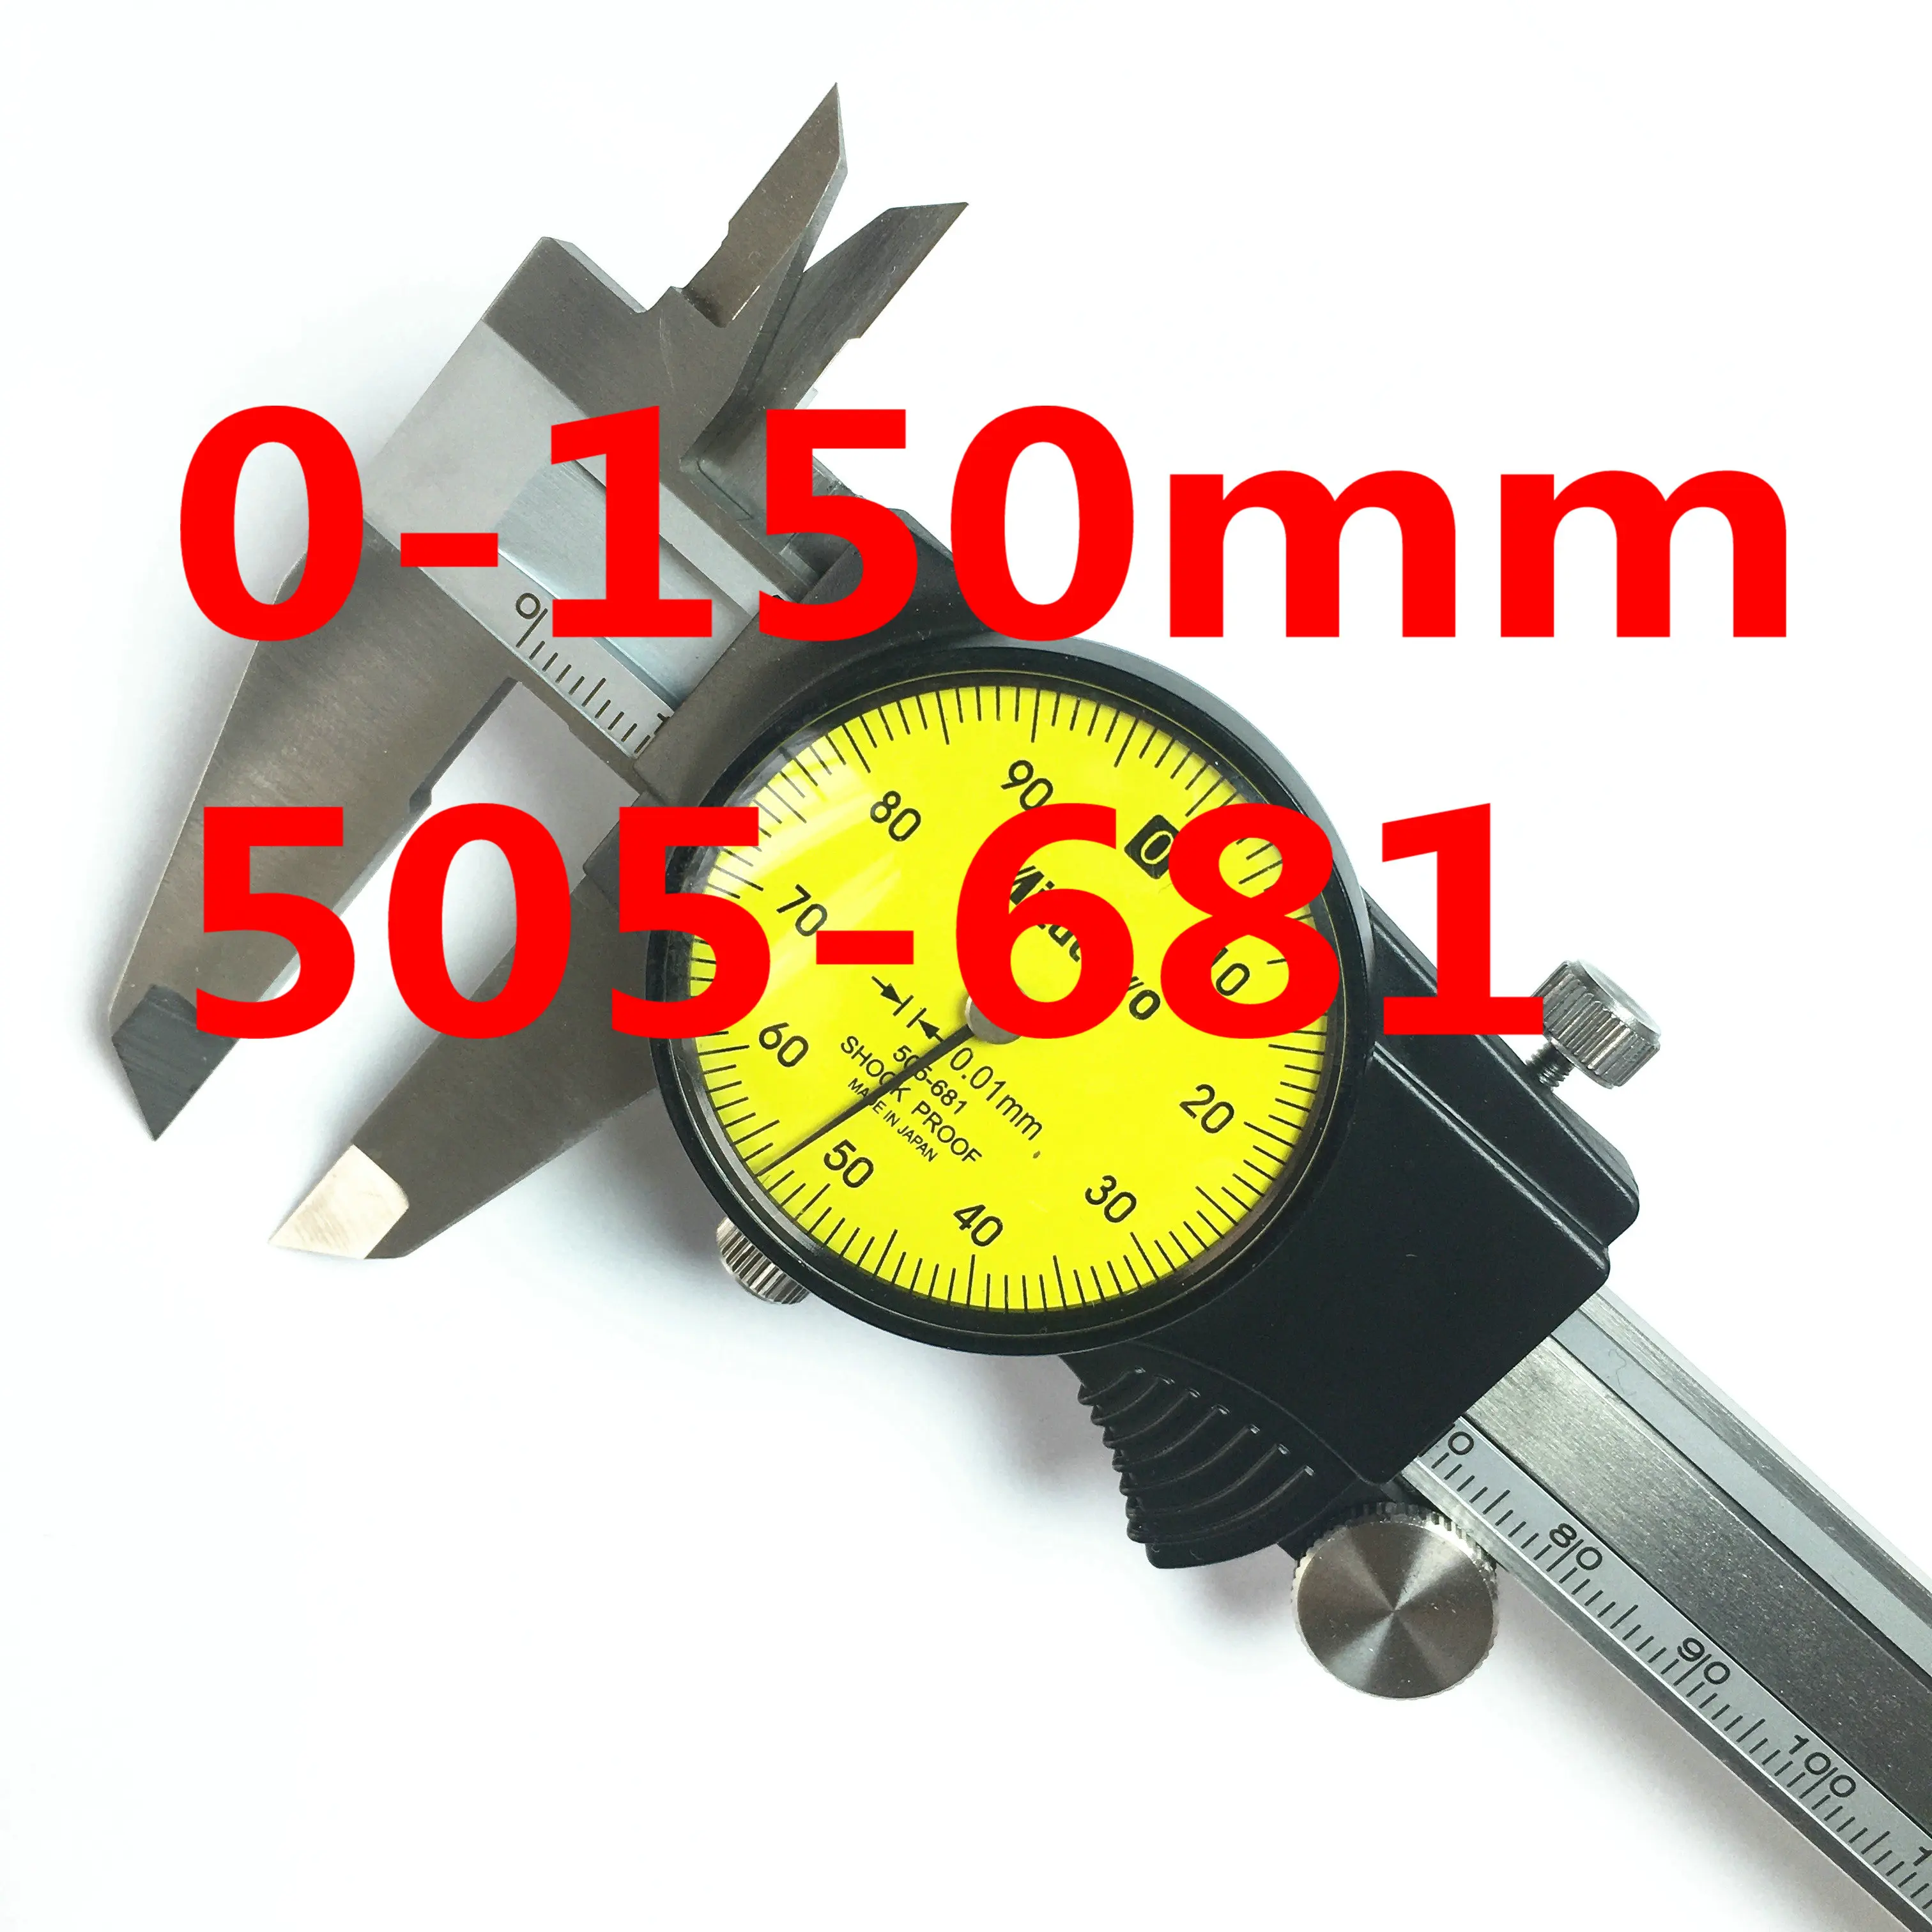 2023 NEW Dial Caliper 505-681 0-150mm 505-682 0-200mm 0.01mm Micrometer Measuring Stainless Steel Tools SHOCK PROOF